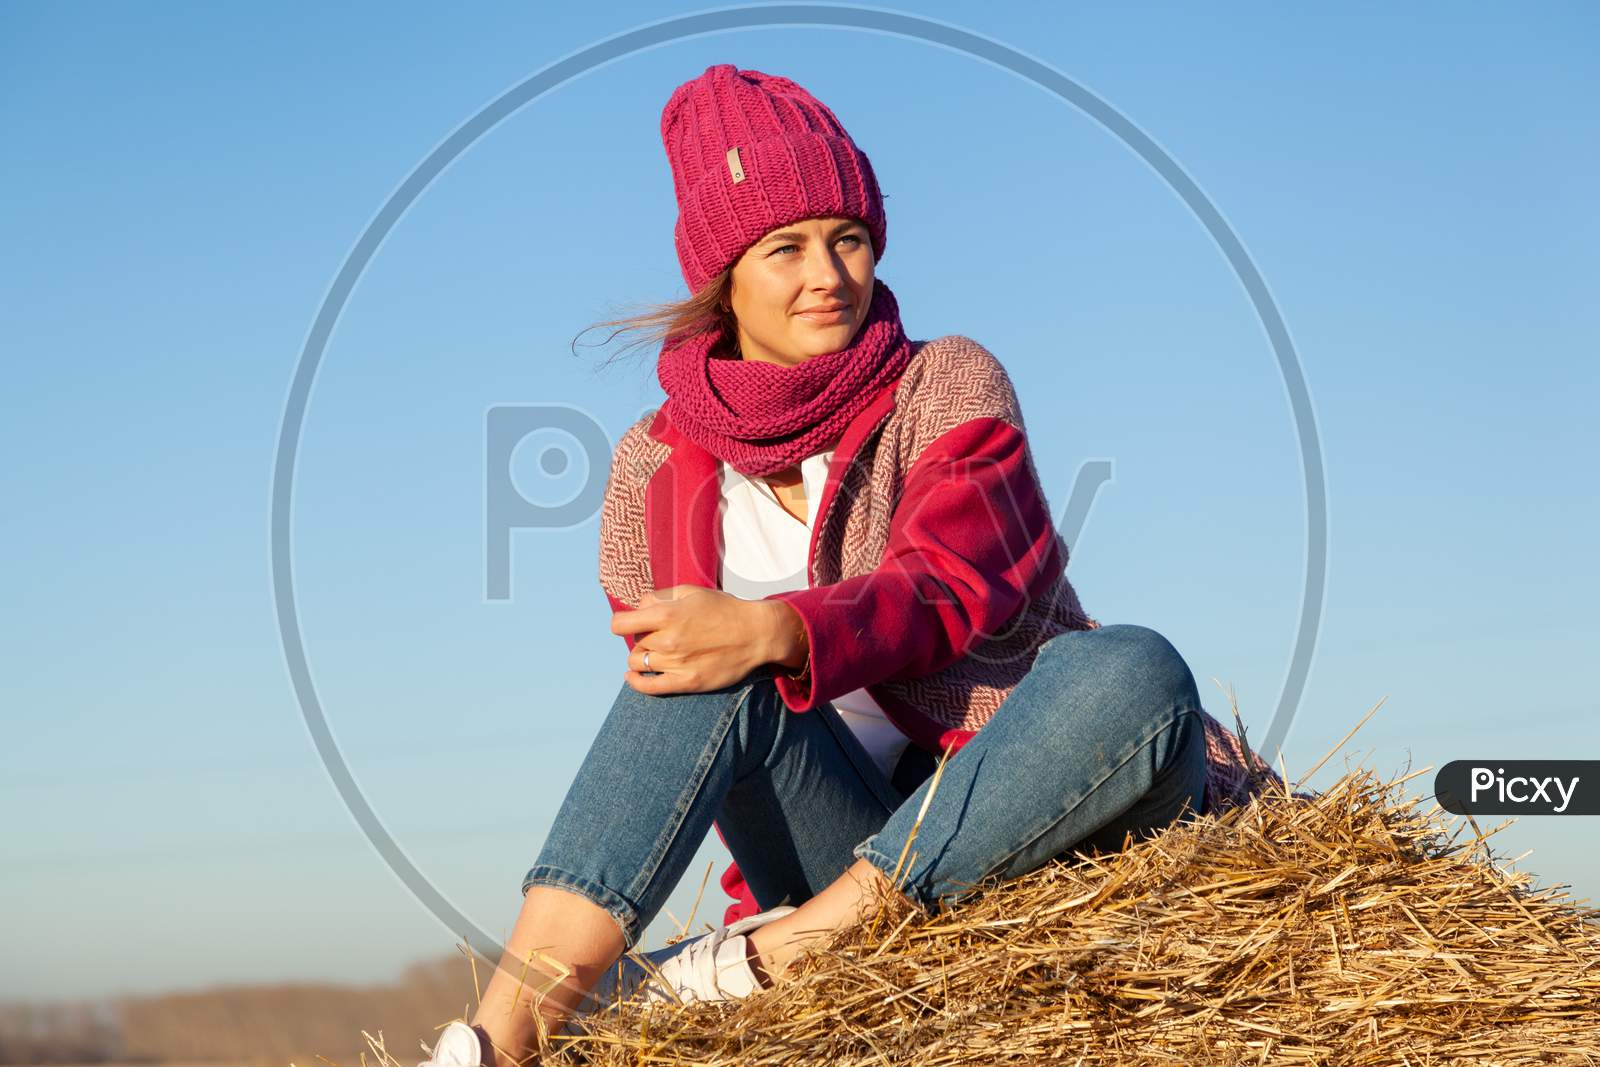 The Concept Of Livestyle  Outdoor In Autumn. Close Up Of A Young Woman Student In A Warm Autumn Clothes Looking Funny, Smilling, Posing For The Camera On  Haystick